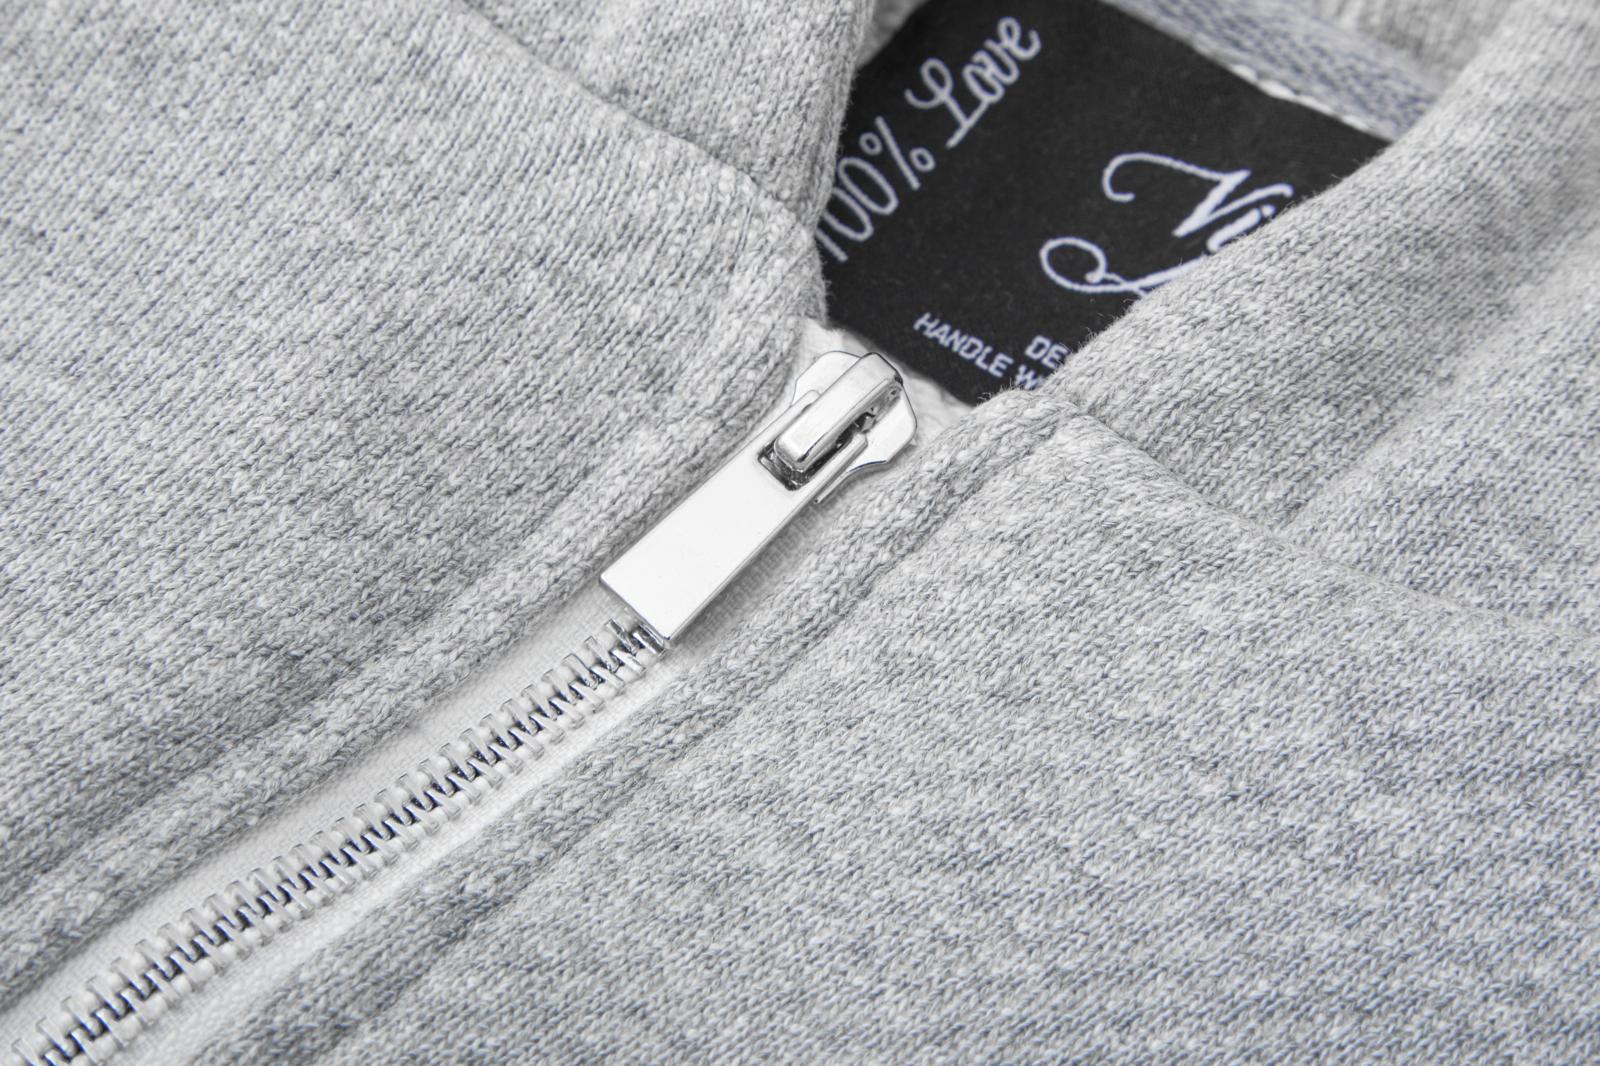 Vintage Amour "Express Yourself" Hoodie (Grey)